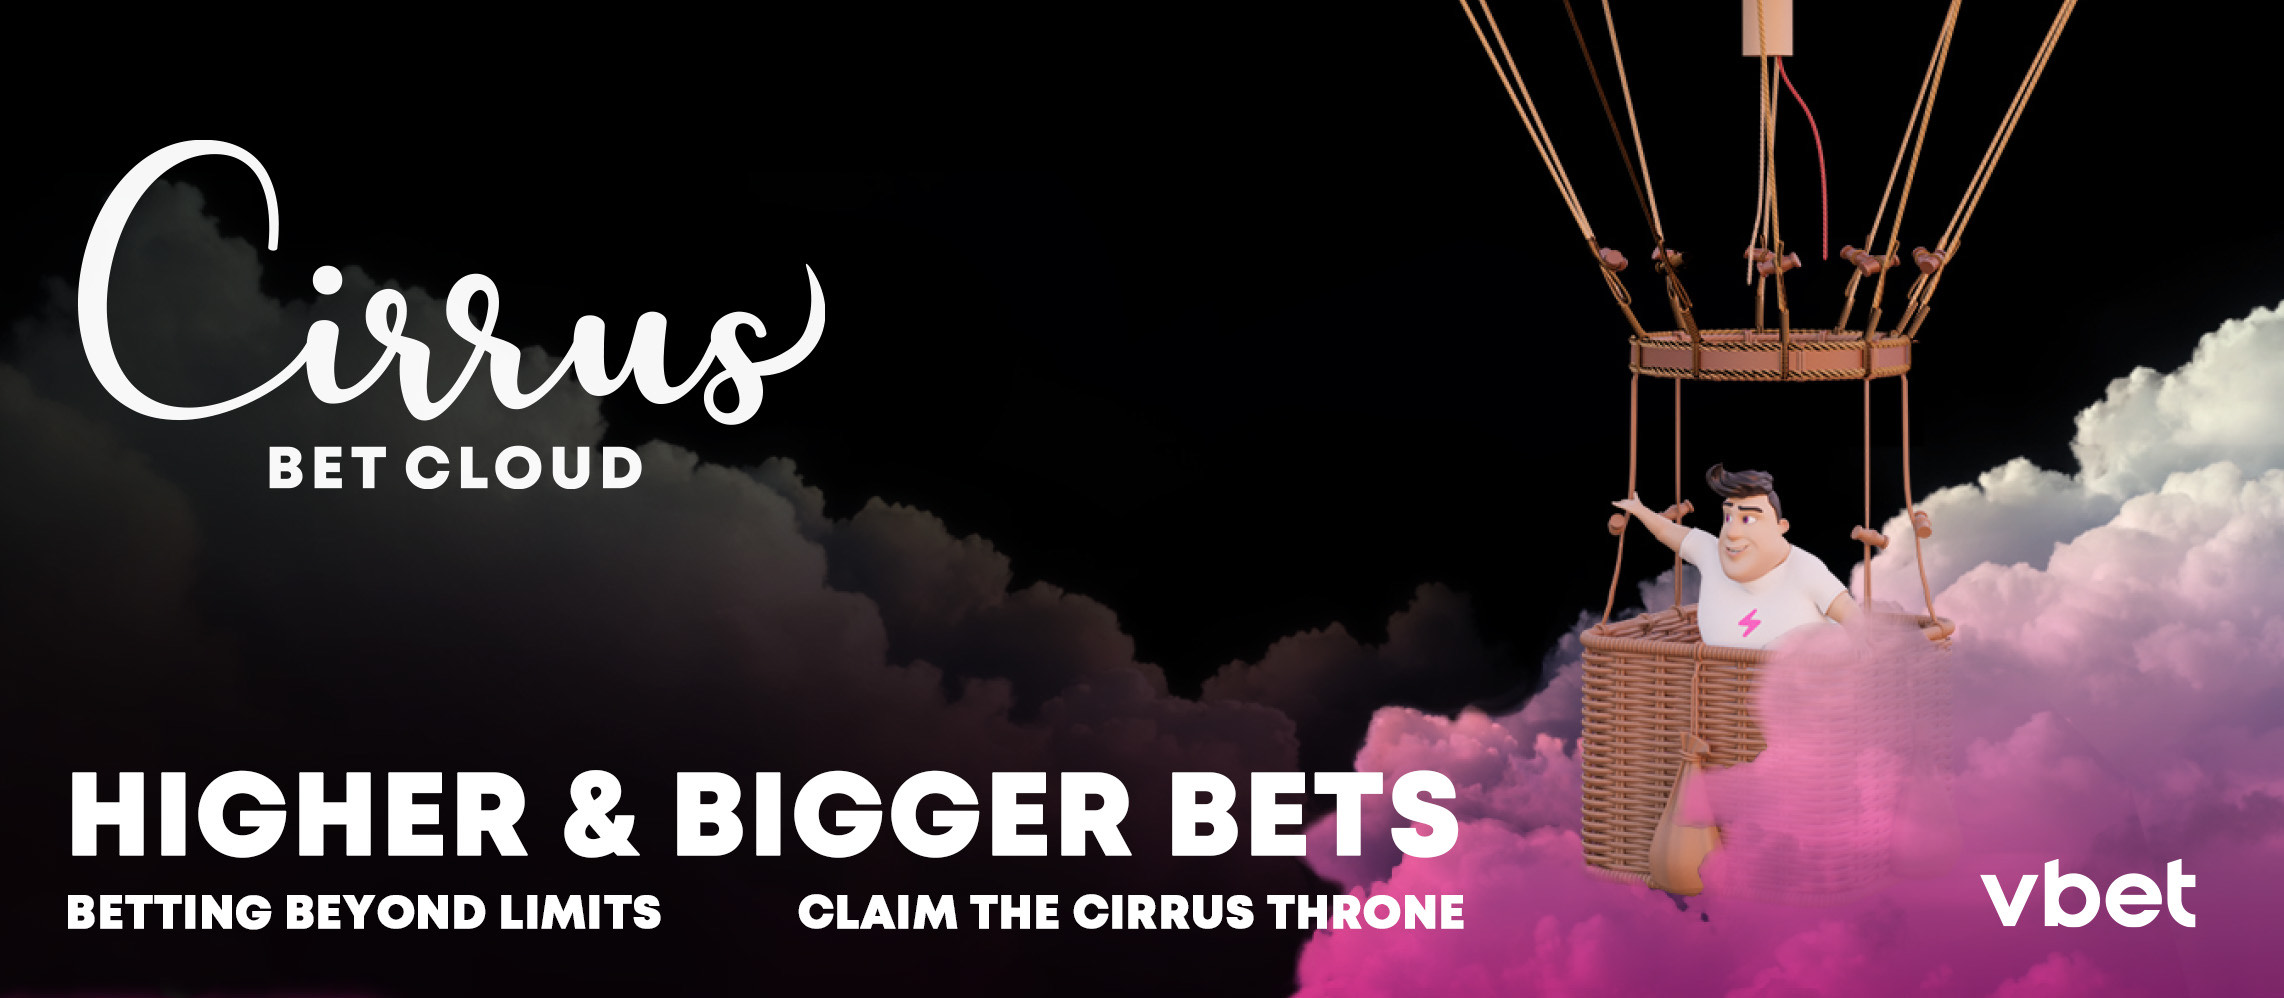 vbet-launches-cirrus-betcloud-for-unlimited-fun!